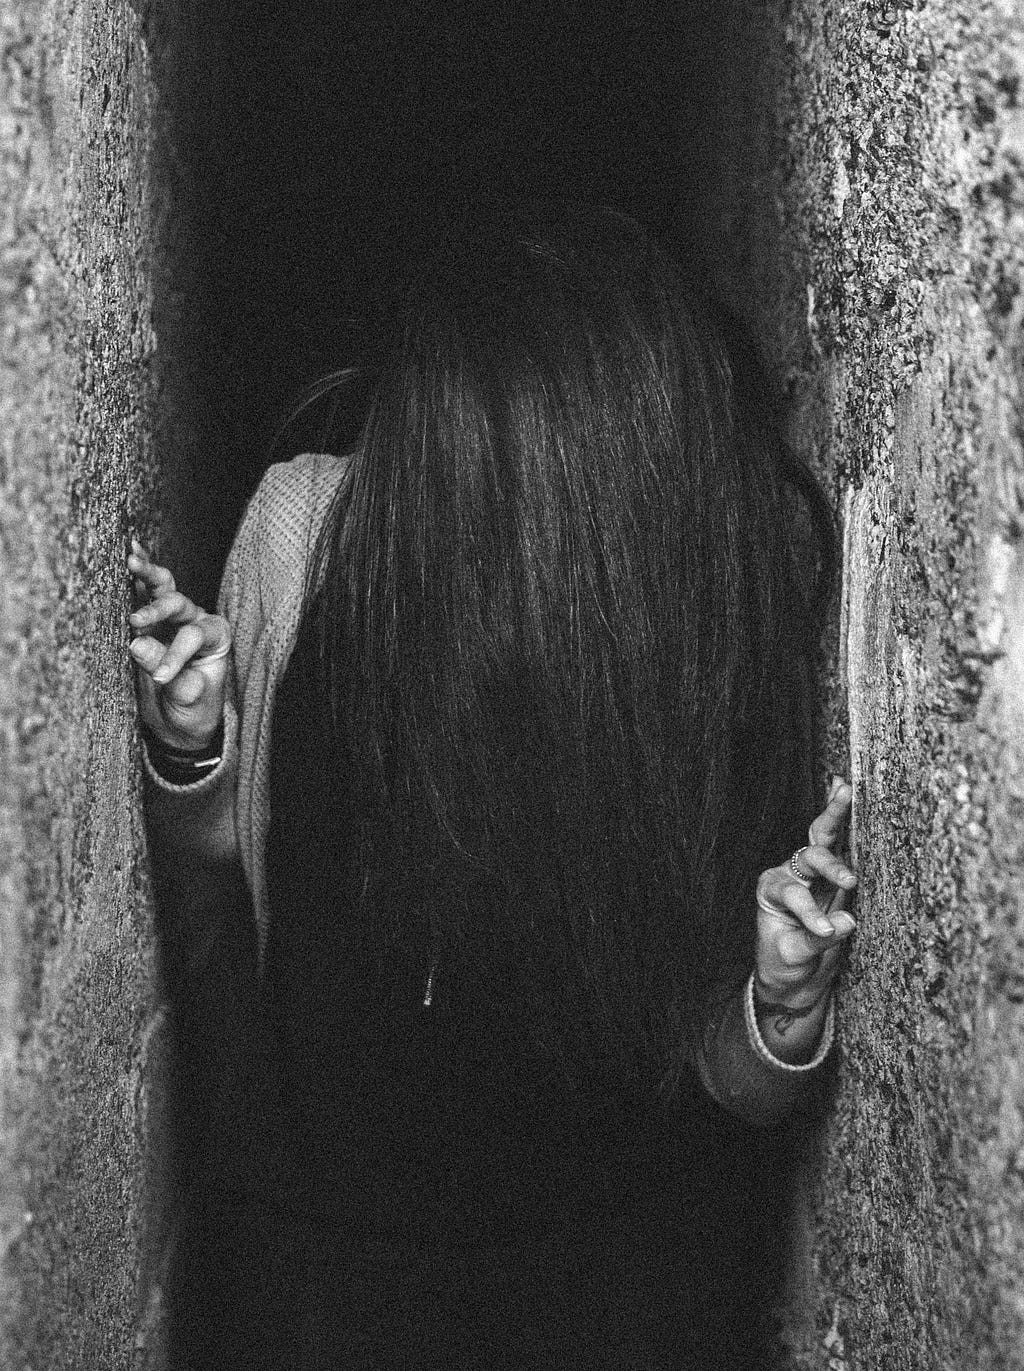 A young person with long black hair pushing against the walls of a narrow alleyway